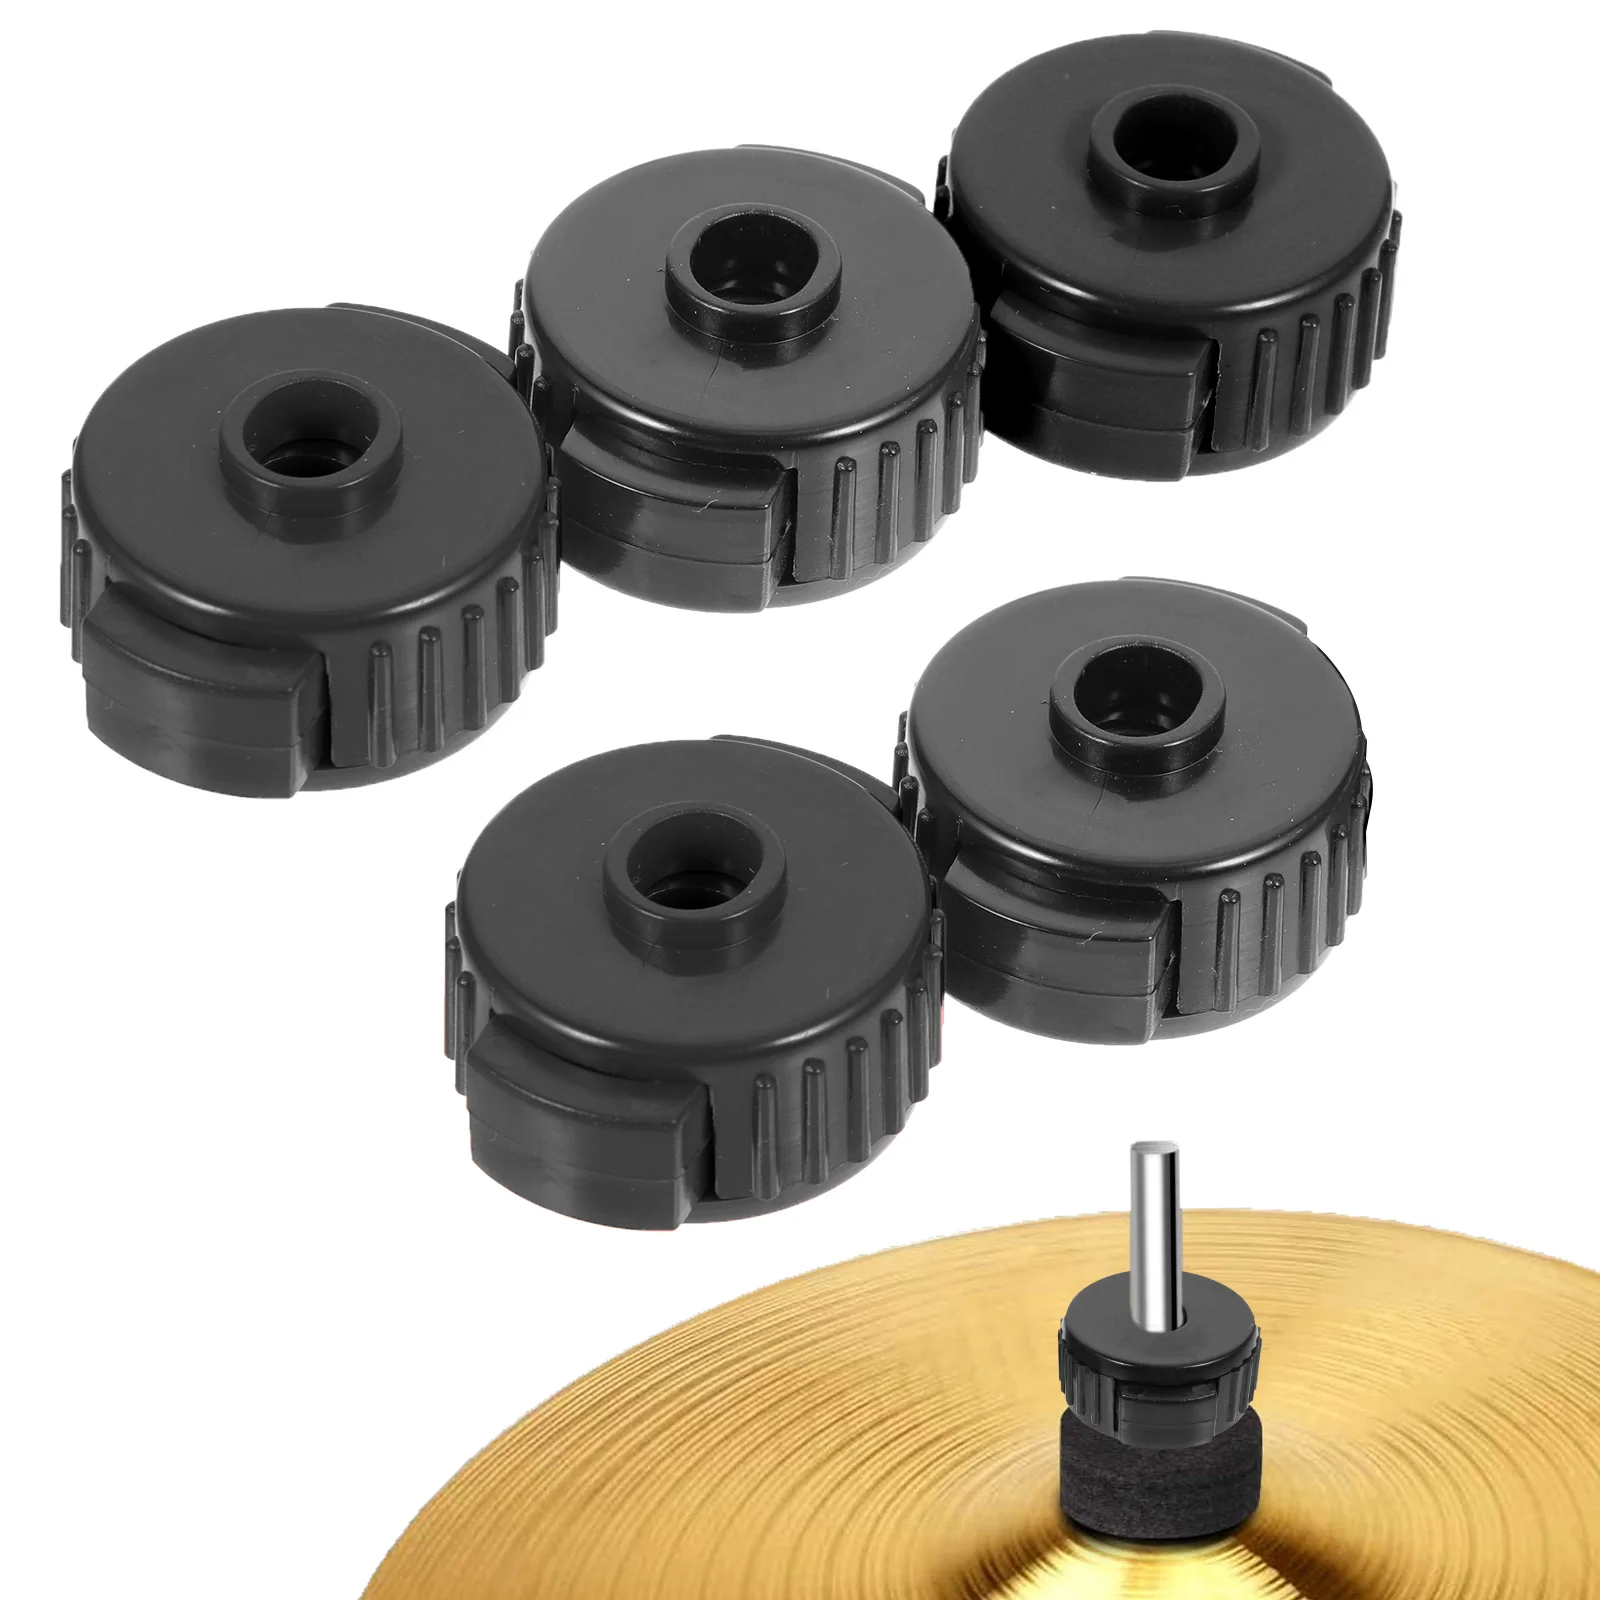 

5 Pcs Cymbal Quick Release Cap Durable Drum Parts Mixer Stand Accessories Installation Nuts Plastic Fixing Attachments